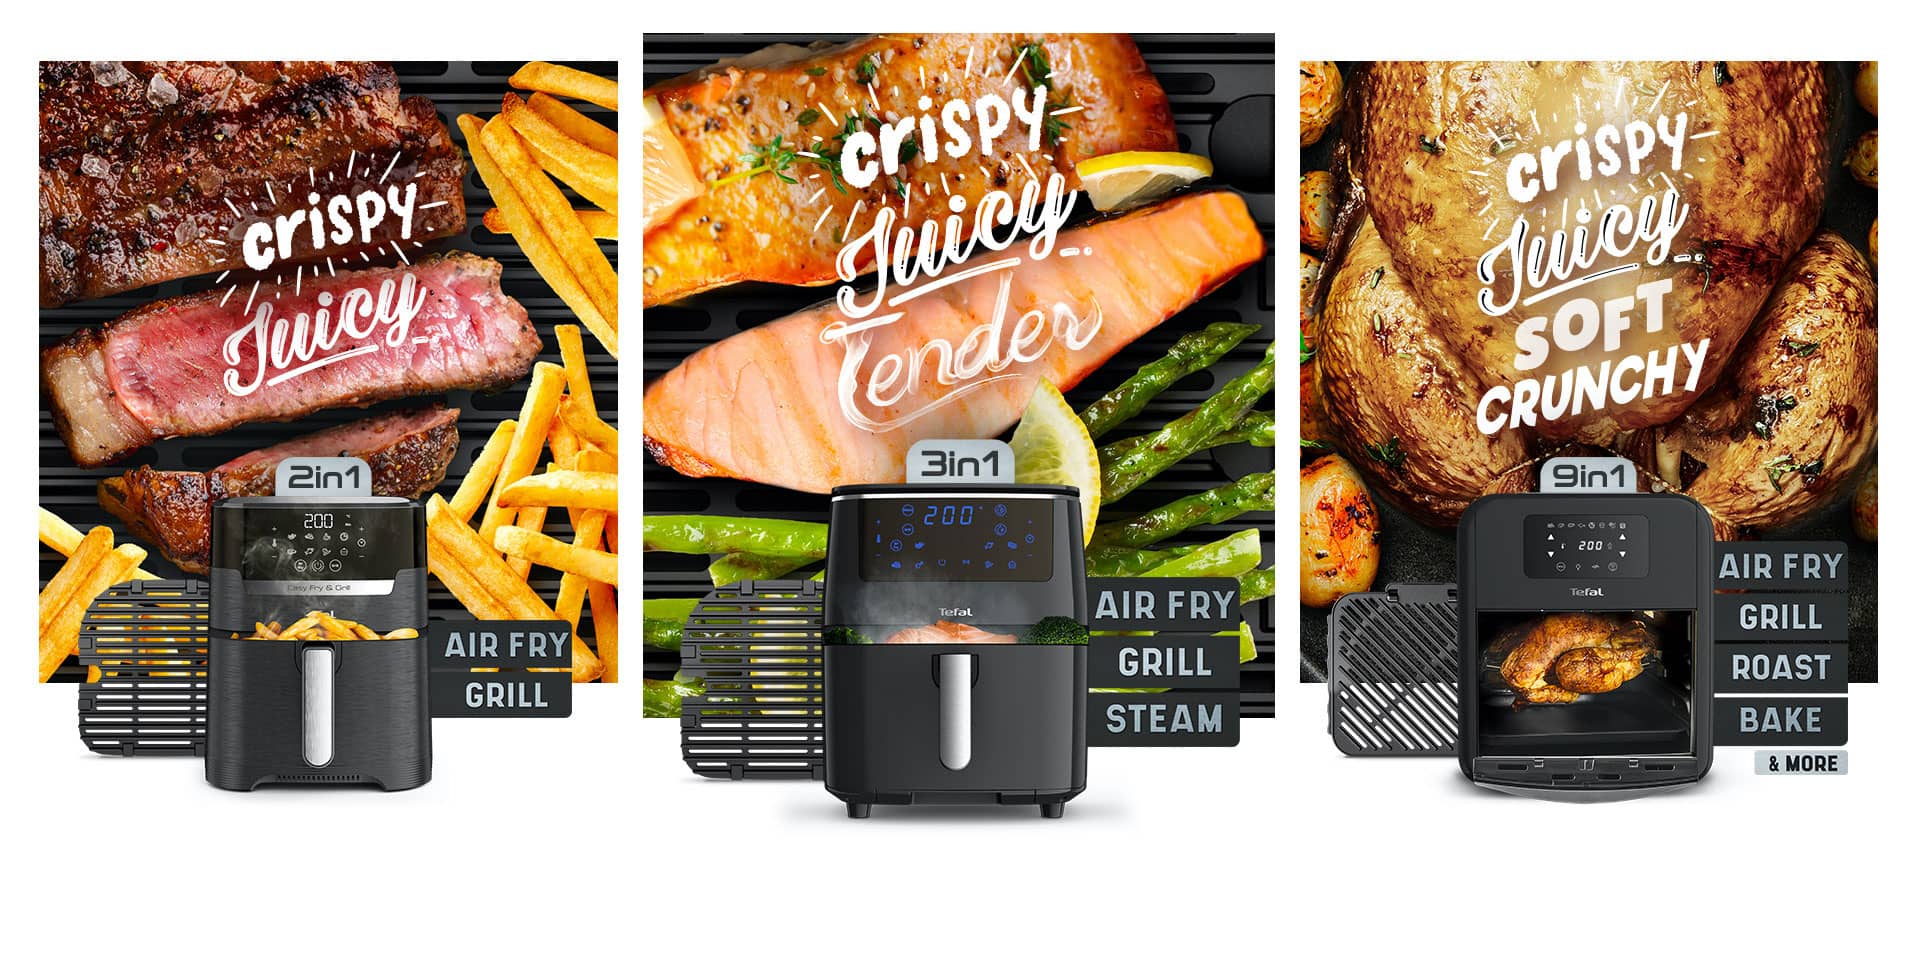 EasyFry range Air Fry, Grill, Steam and Oven from Tefal UK, the Creators of Air Frying.